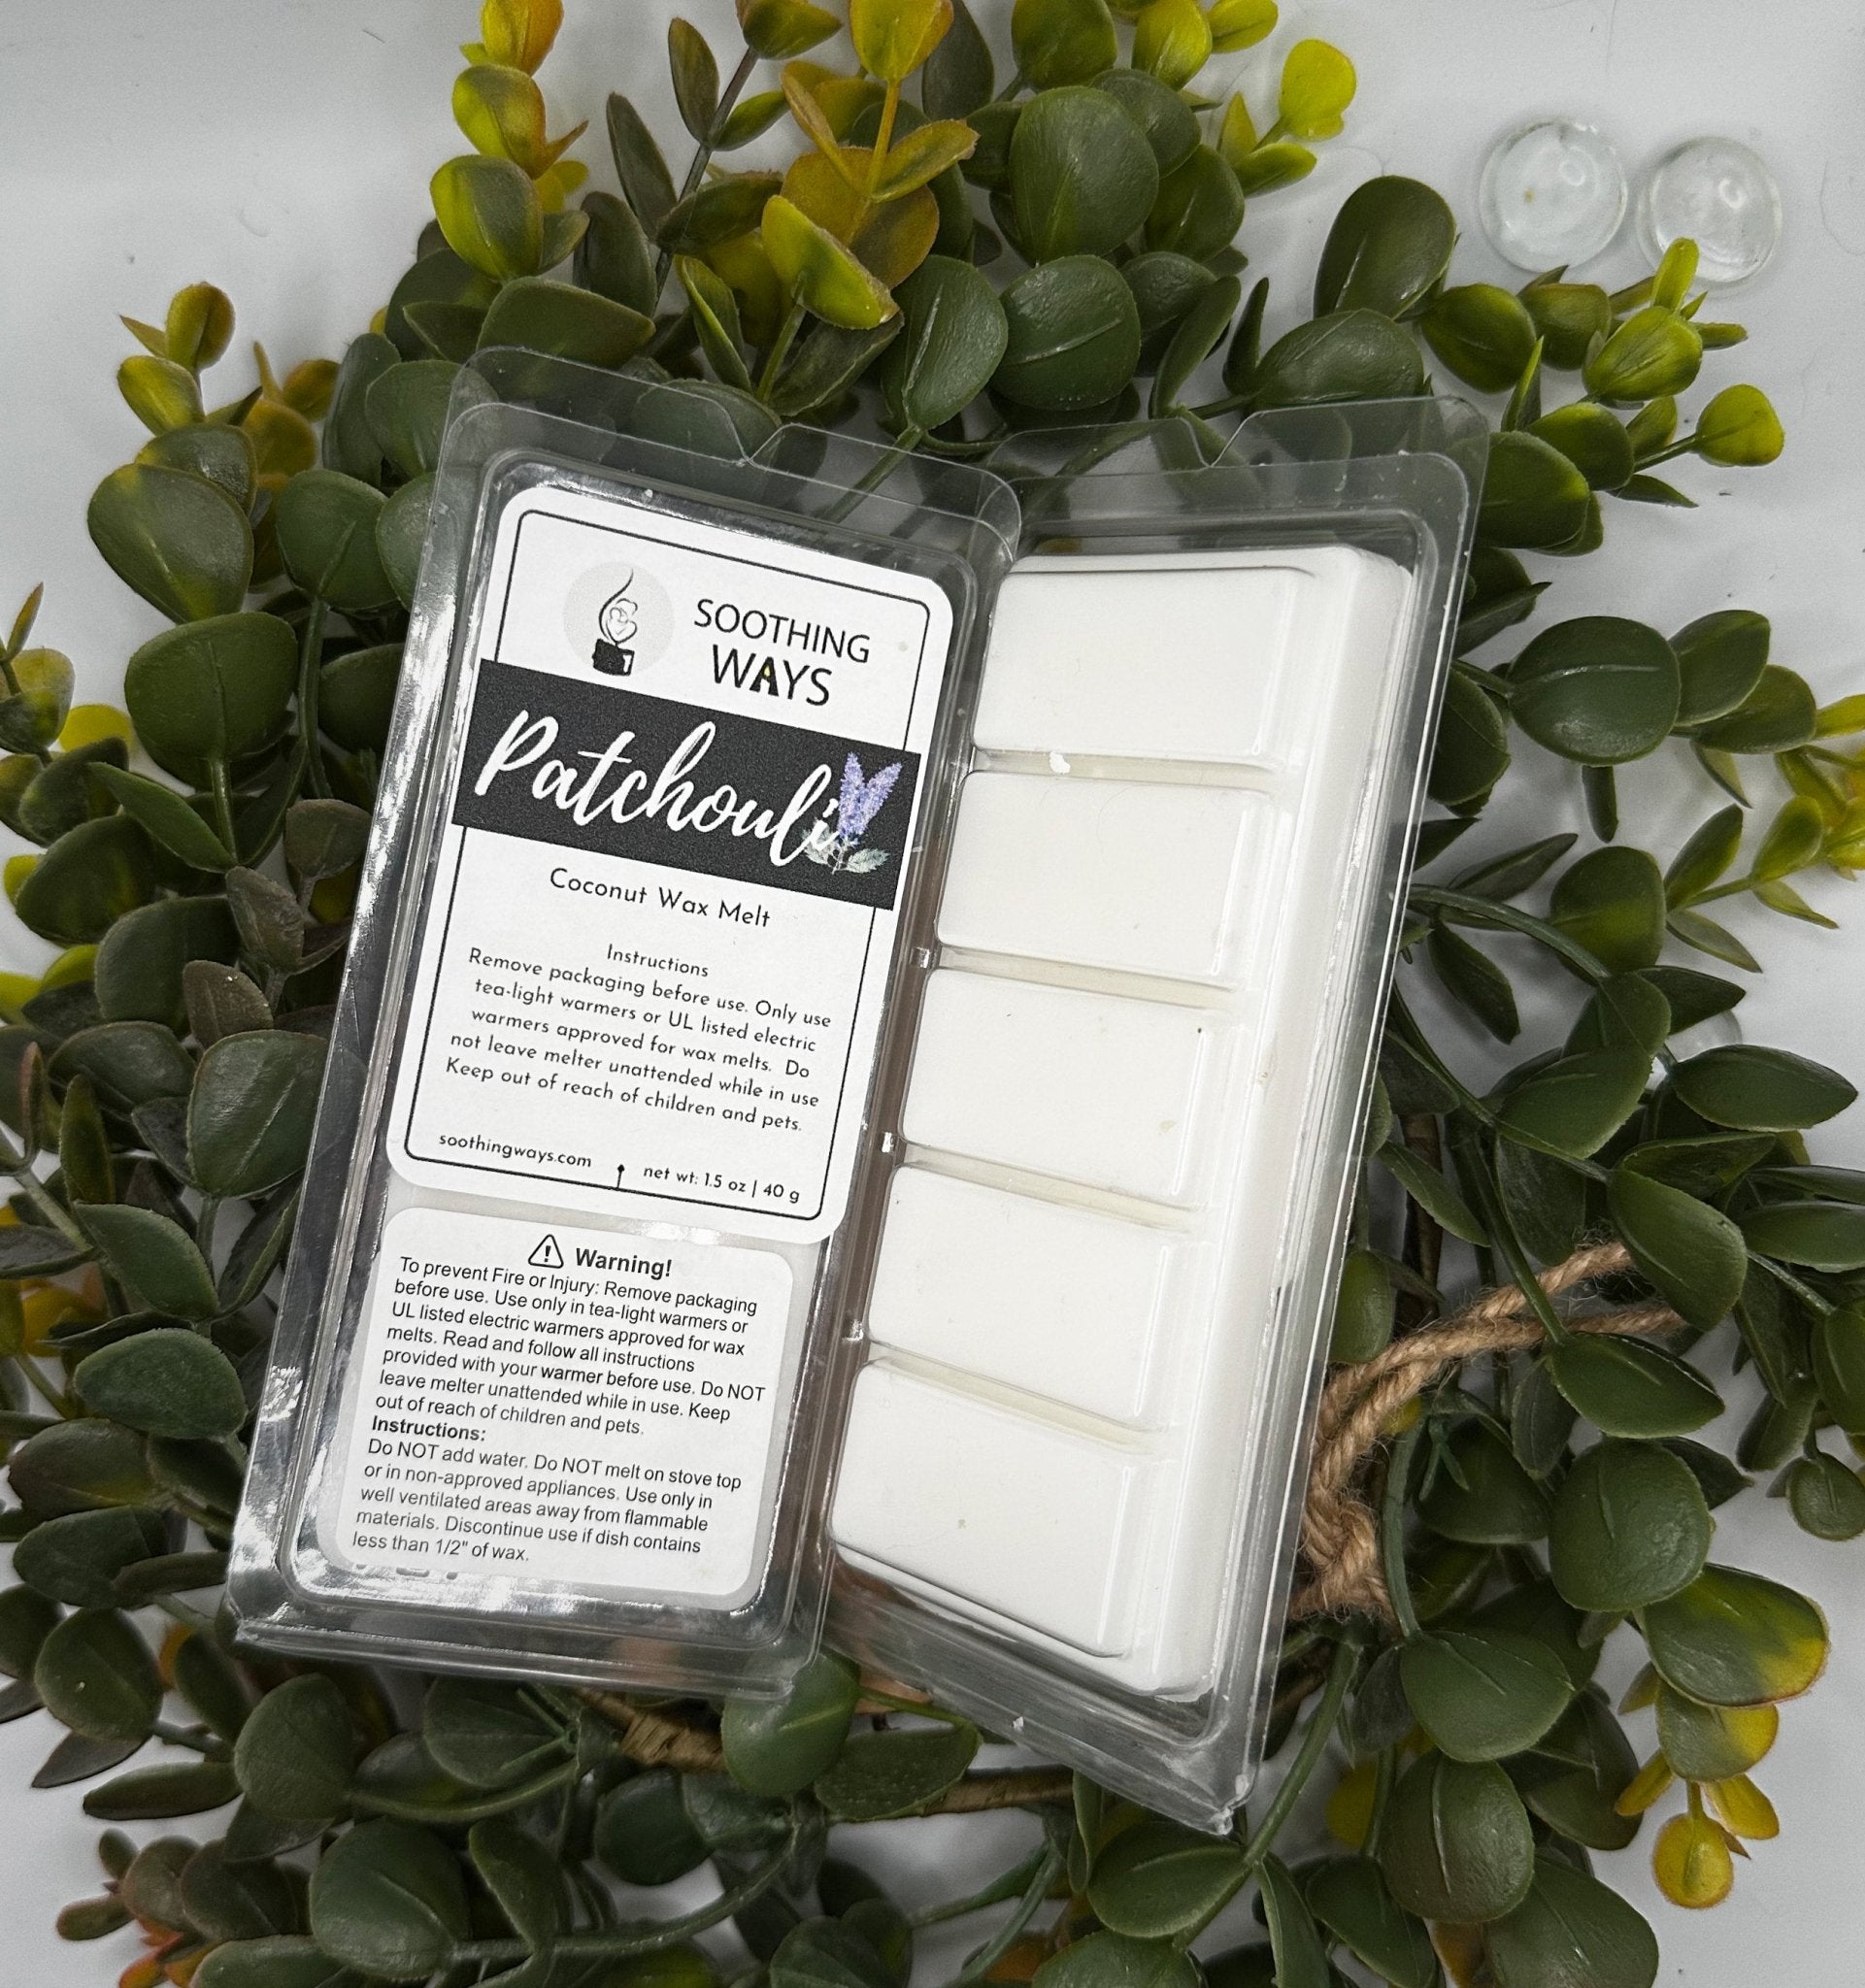 Patchouli - Wax Melt - Soothing Ways